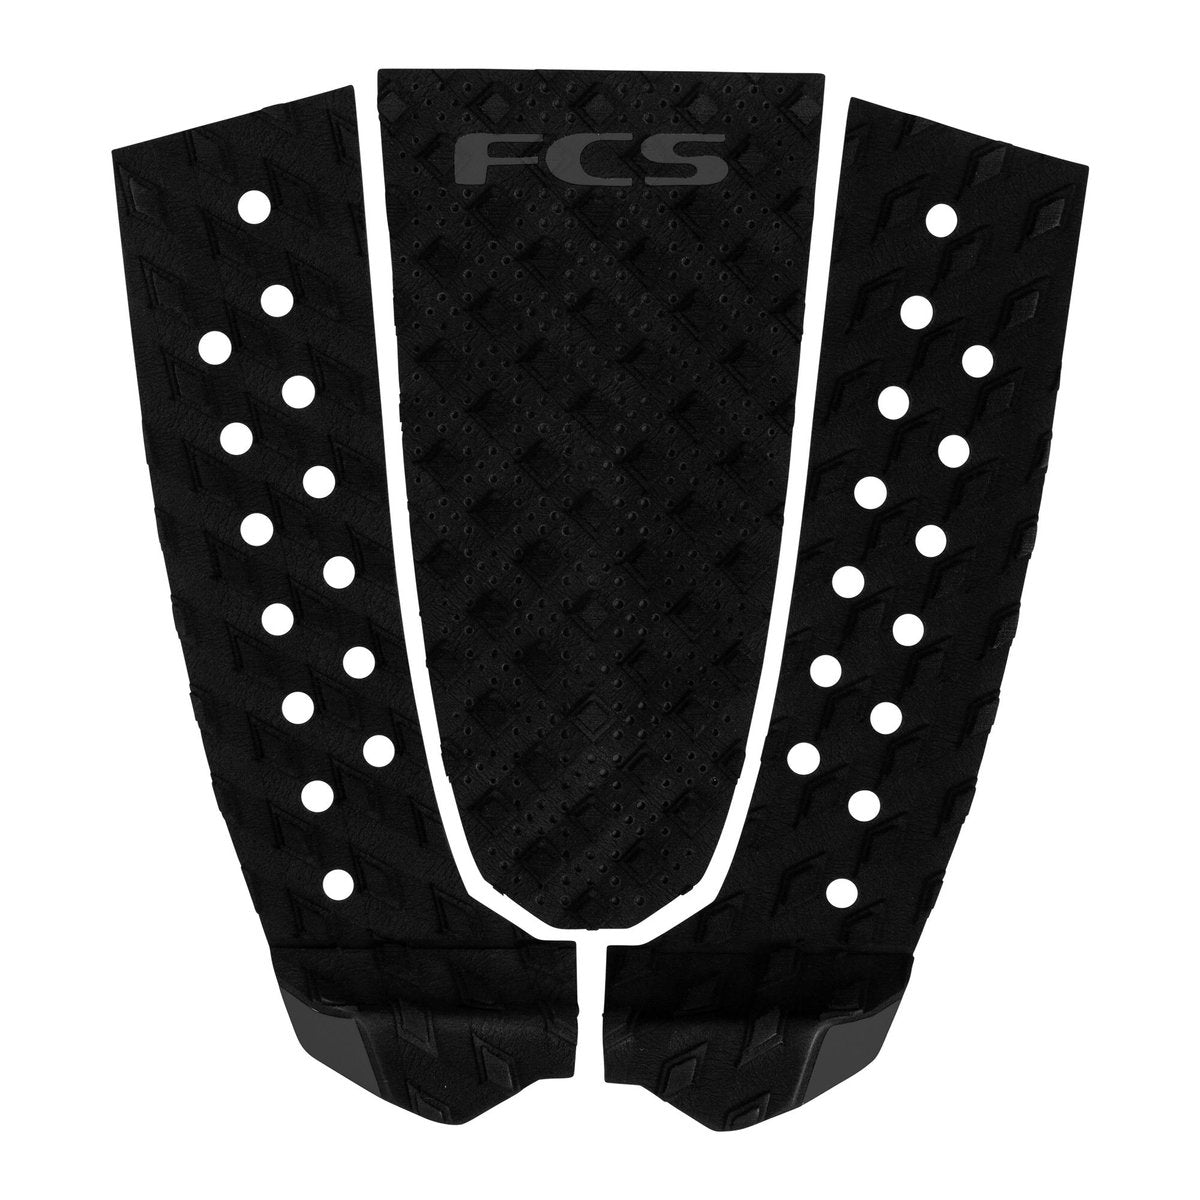 FCS T-3 Traction Pad 3 piece traction, designed to suit performance boards. Traction Pad Black Charcoal